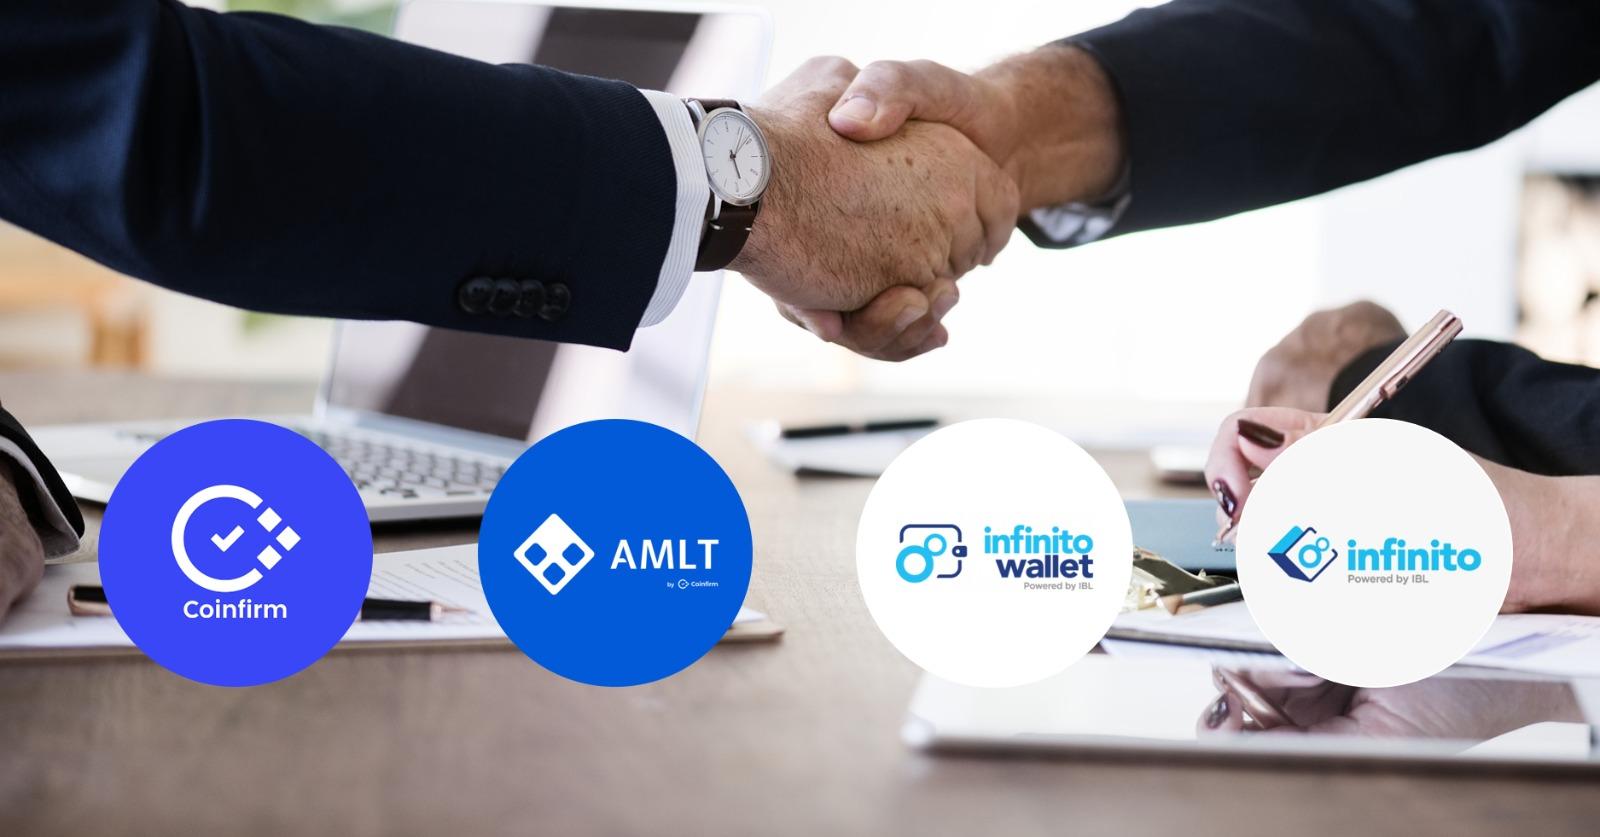  wallet infinito risk users check aml coinfirm 